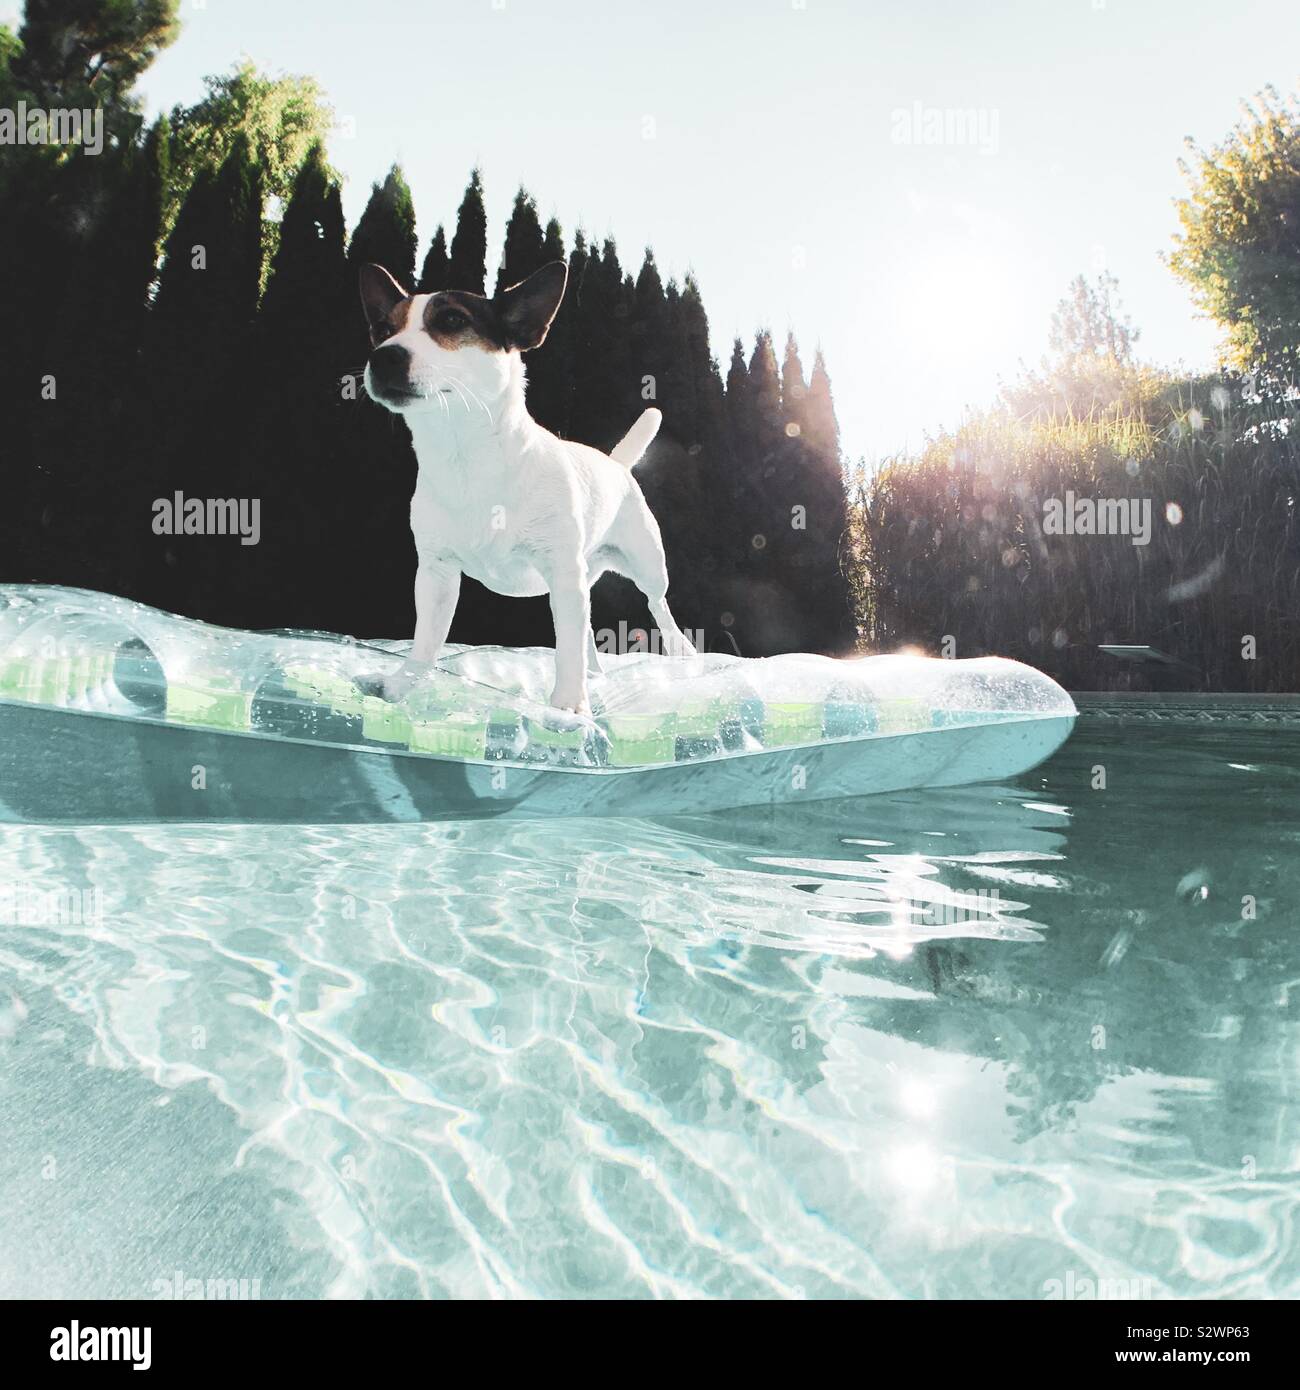 Dog standing on pool float in a backyard swimming pool on a sunny afternoon. Stock Photo